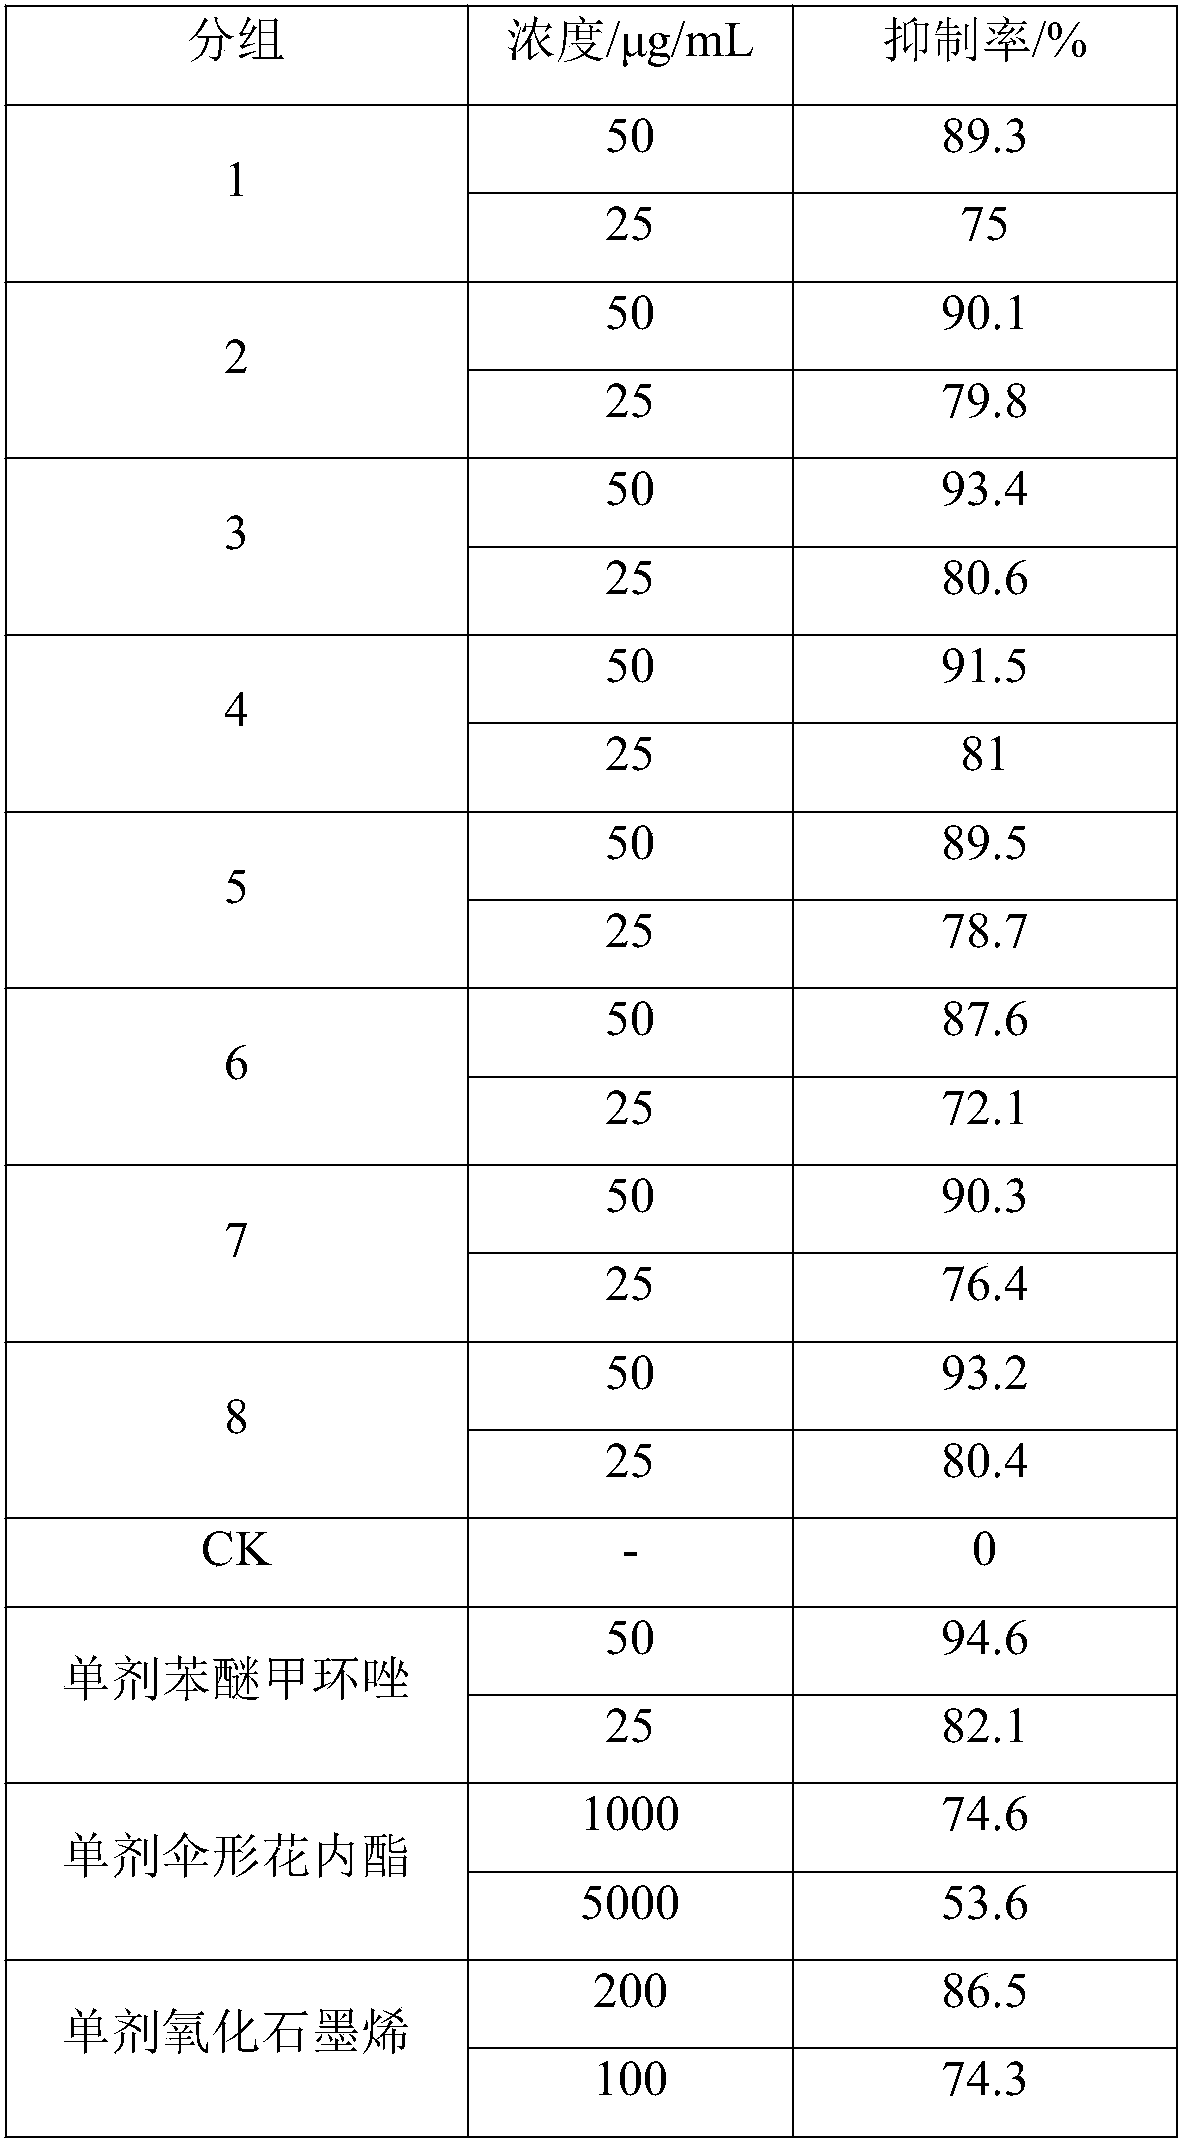 Composite for preventing and treating gray mold of cucurbita pepo and bactericide prepared by composite